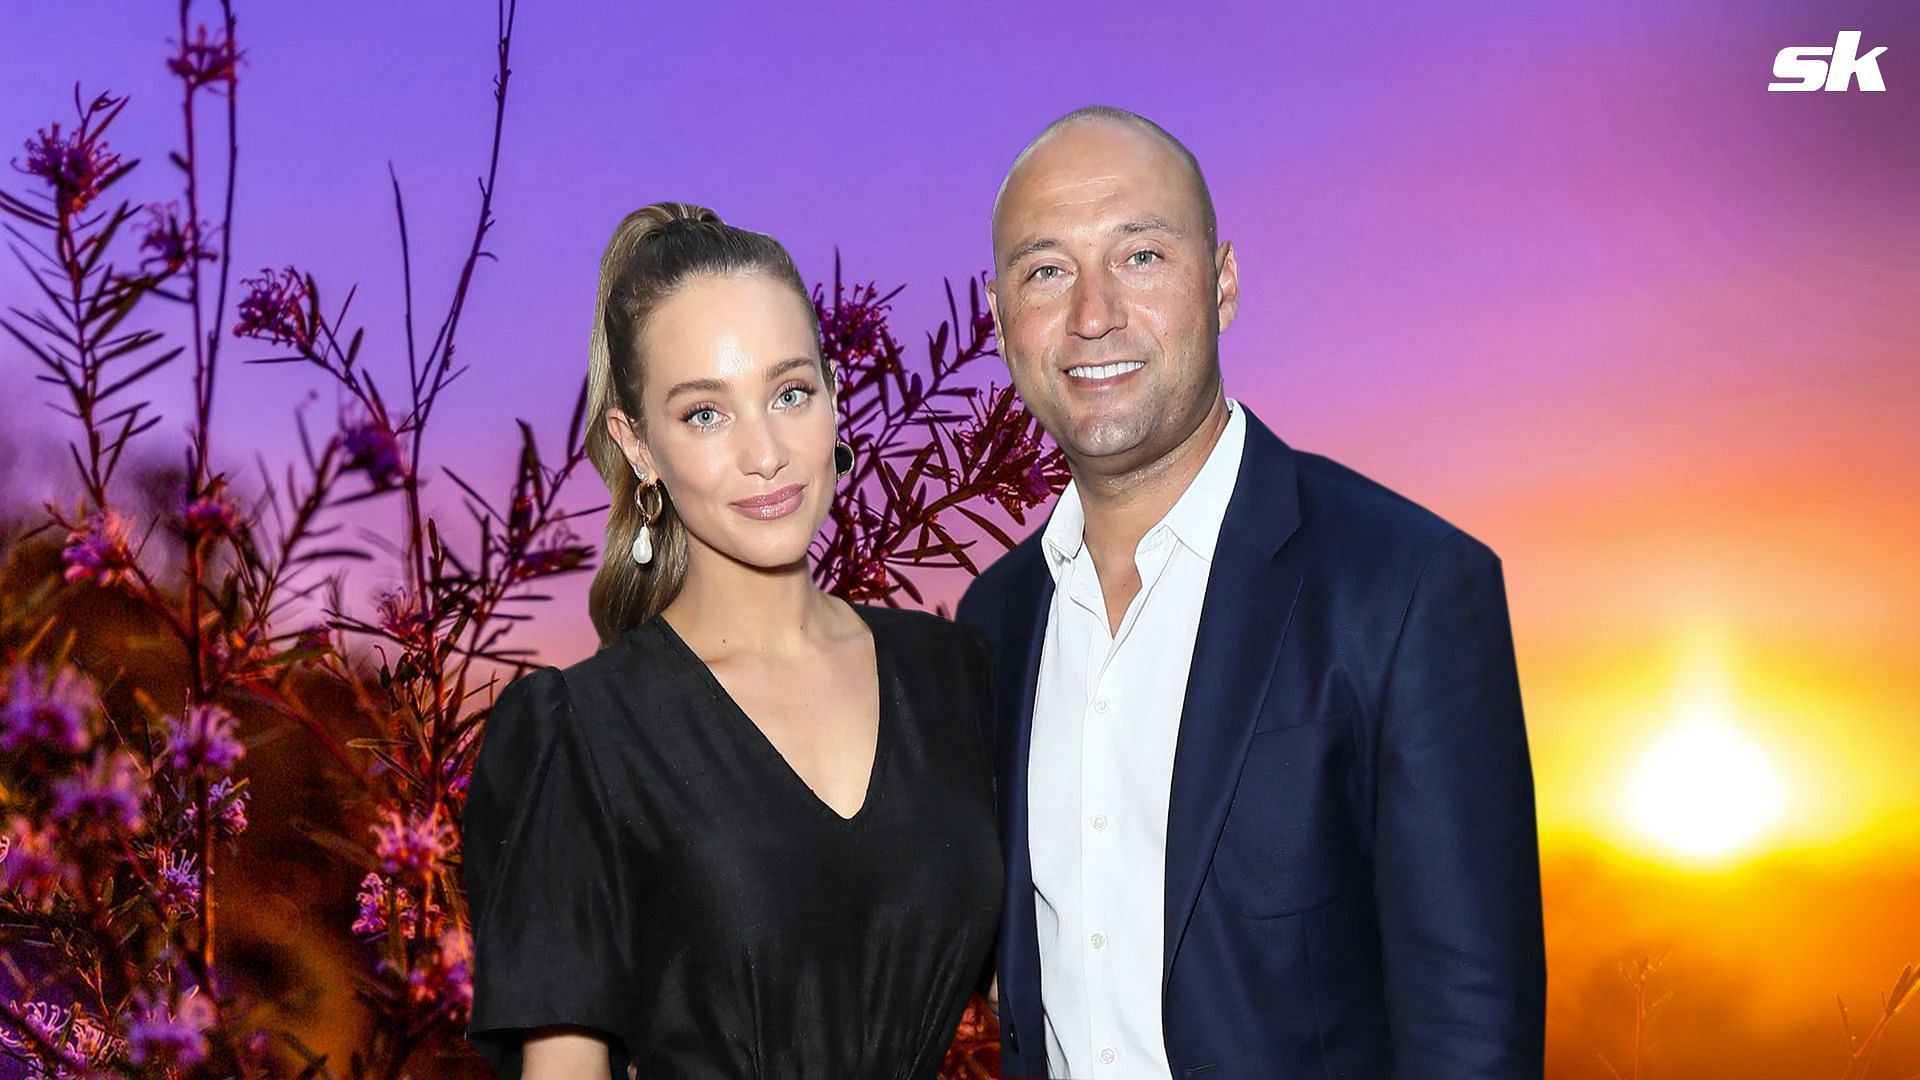 Derek Jeter credited becoming a father